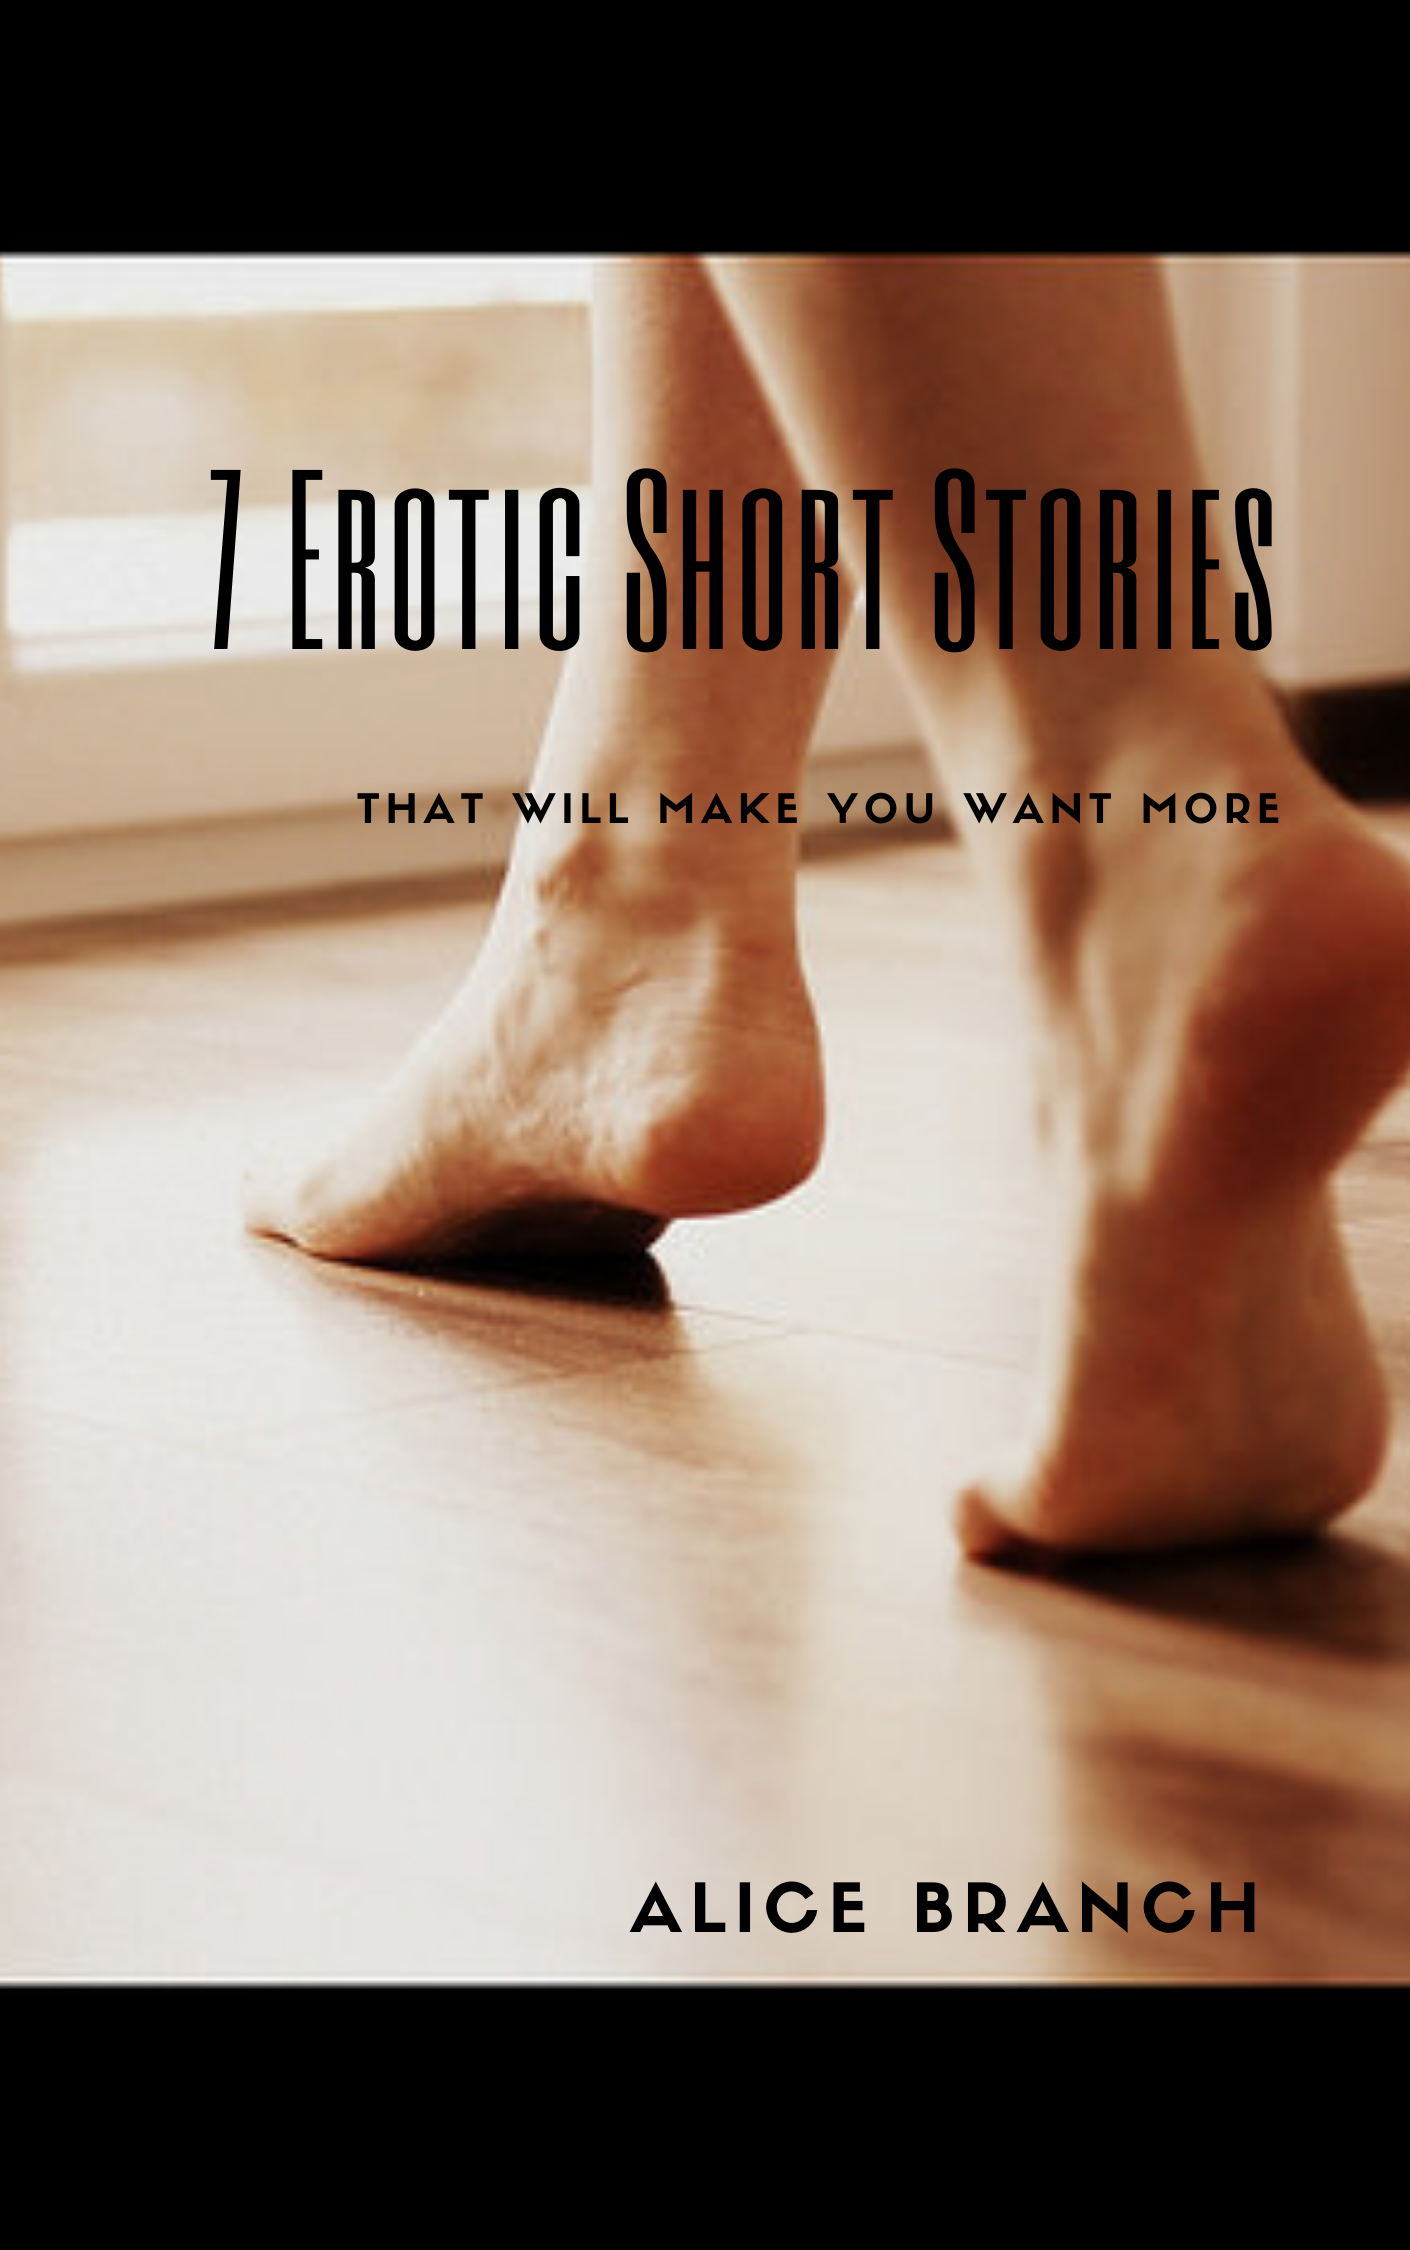 FREE: 7 Erotic Short Stories by Alice Branch